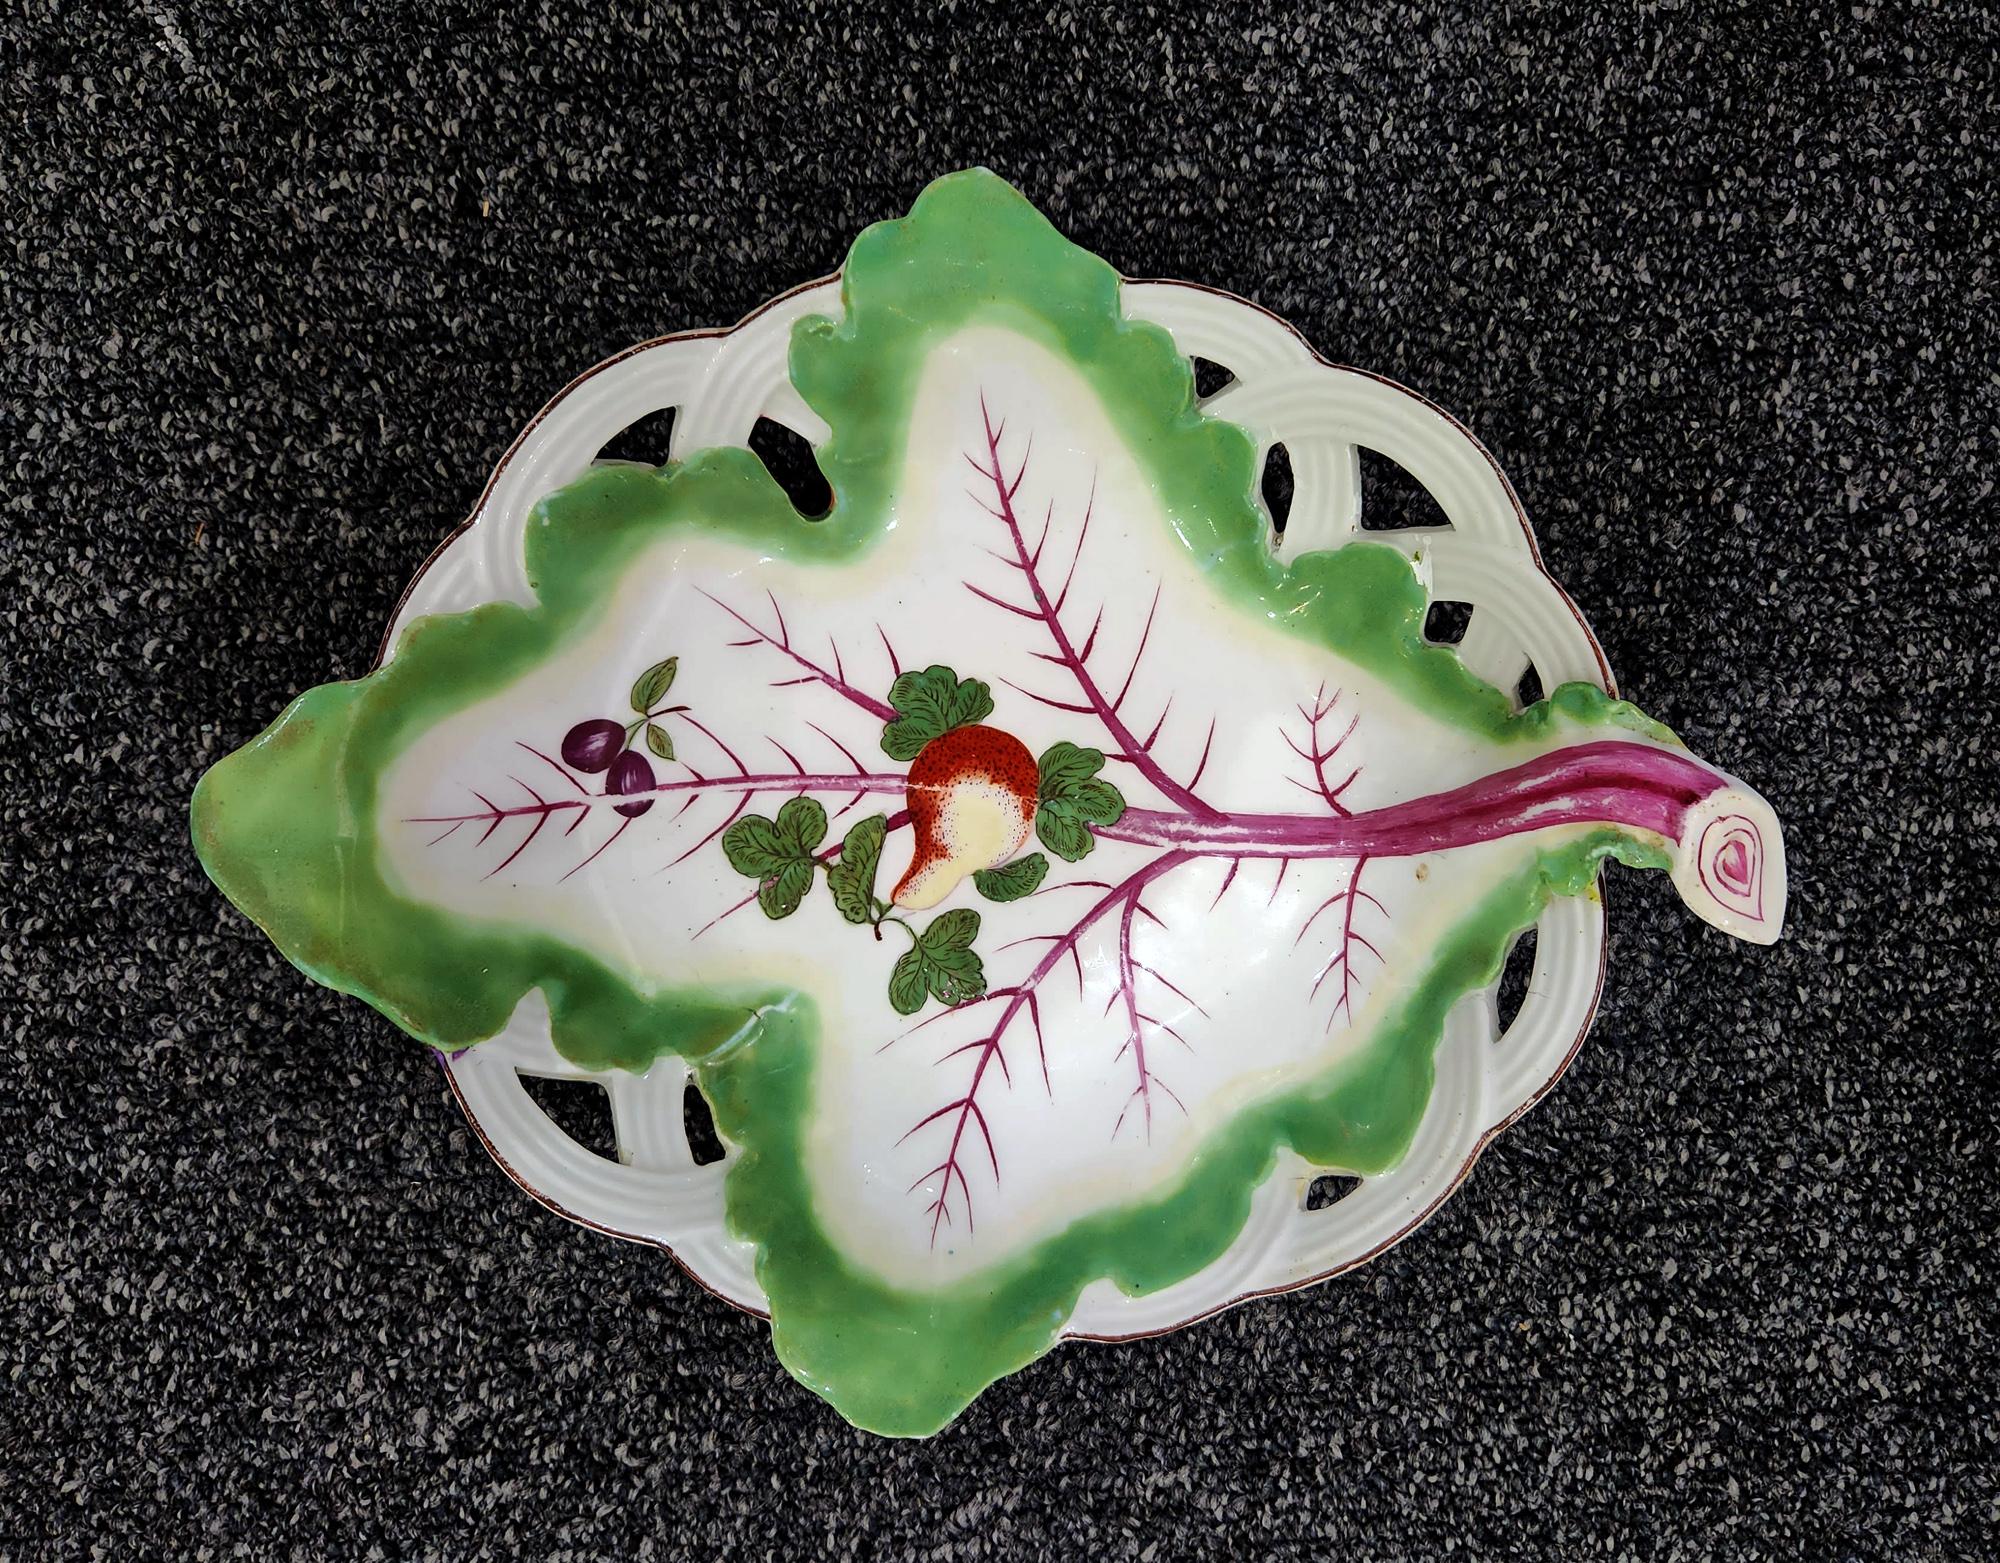 18th century Chelsea Porcelain Trompe L'oeil Leaf Dish with Fruit,
Brown Anchor,
circa 1758-60

The trompe L'oeil porcelain Chelsea Porcelain dish depicts a large green leaf with purple veining draped over an openwork basket. Superimposed on the